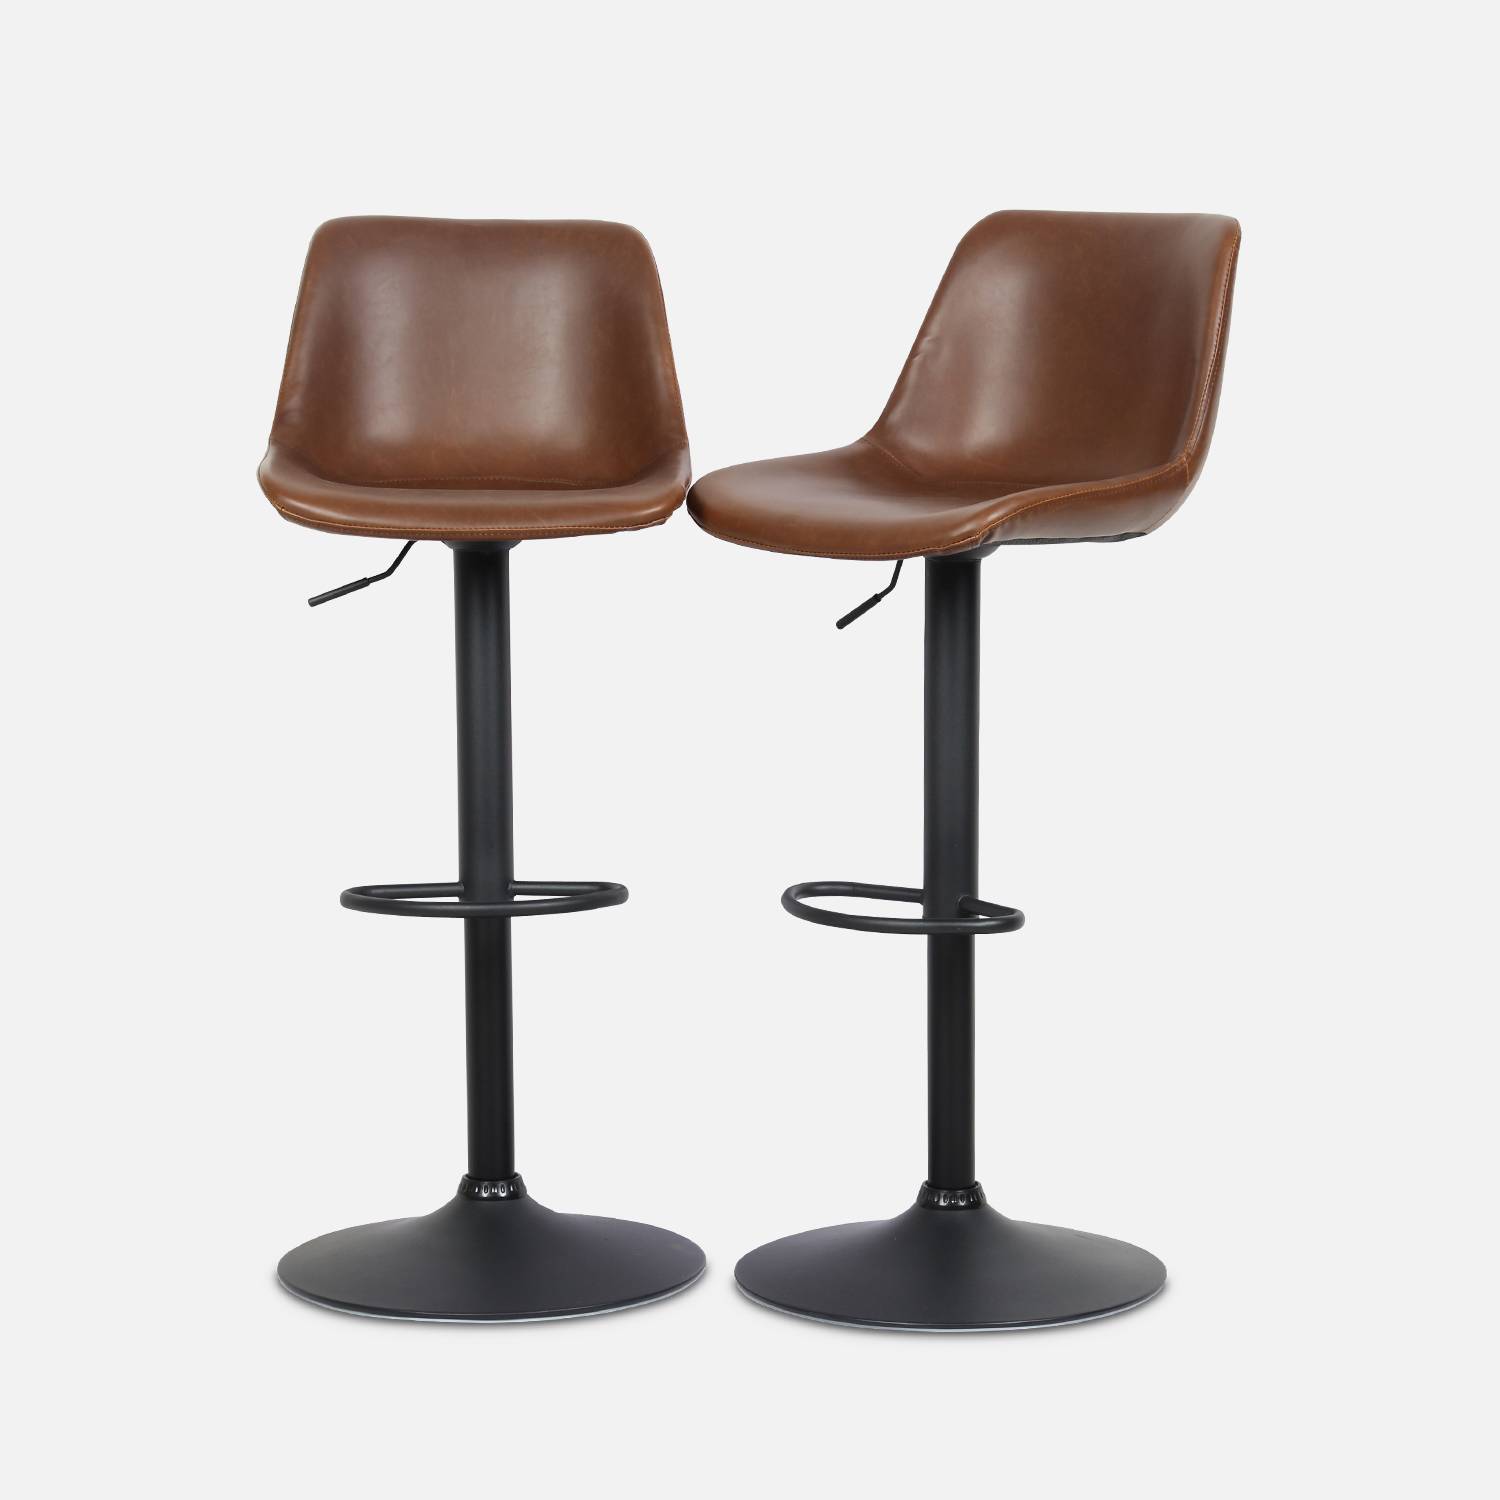 Pair of faux leather, square backrest, adjustable bar stools, seat height 61.5 - 83.5cm - Noah - Brown,sweeek,Photo3